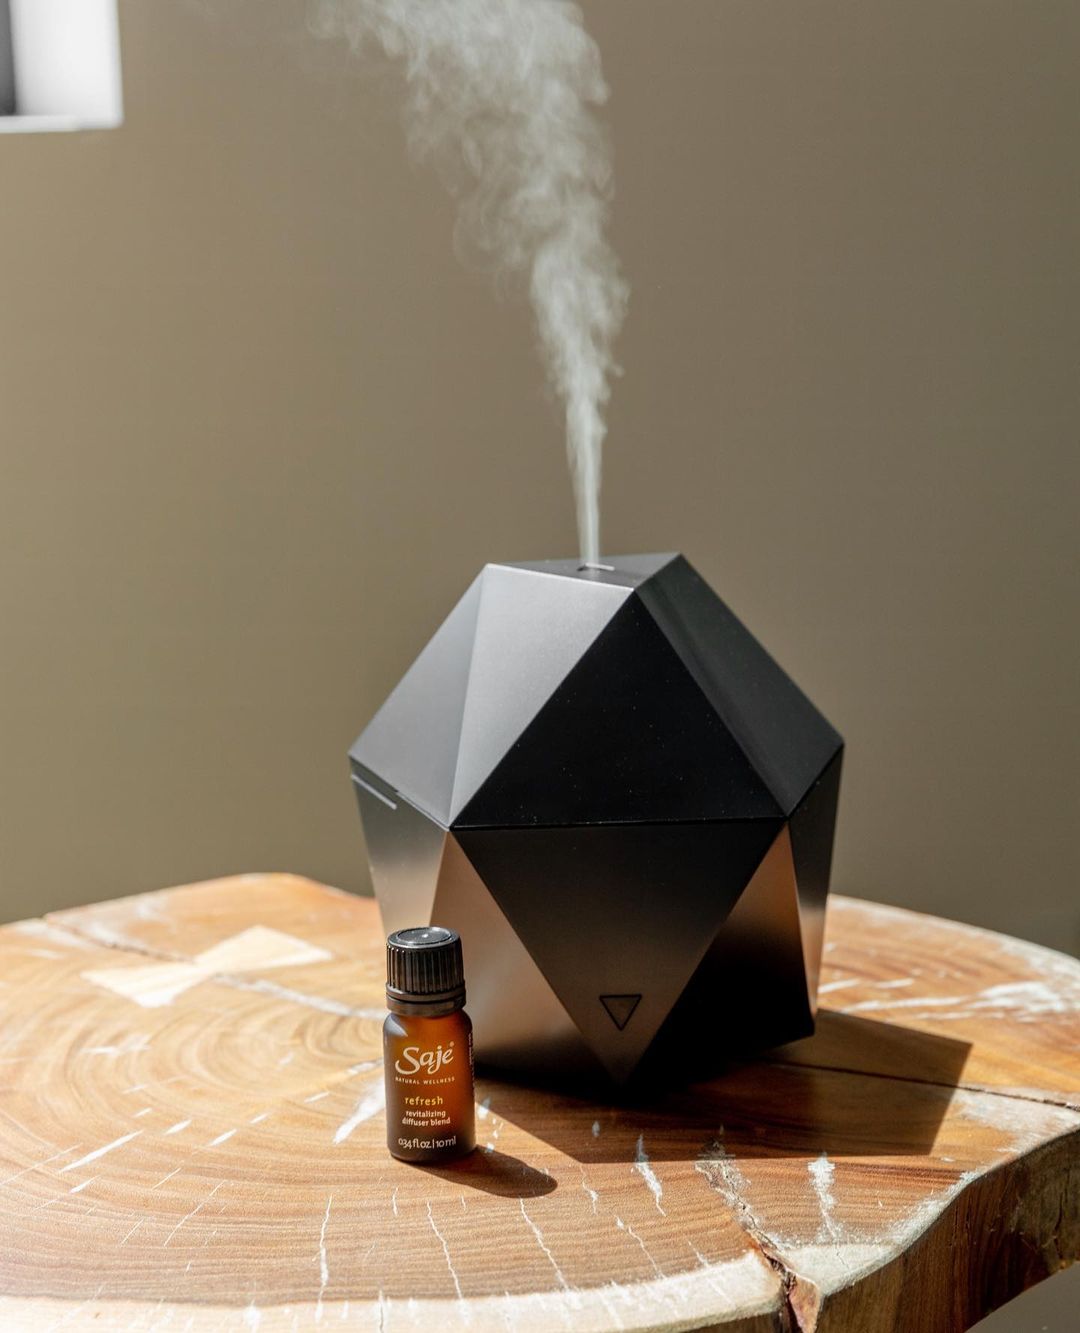 Essential oils diffuser from Saje Natural Wellness.